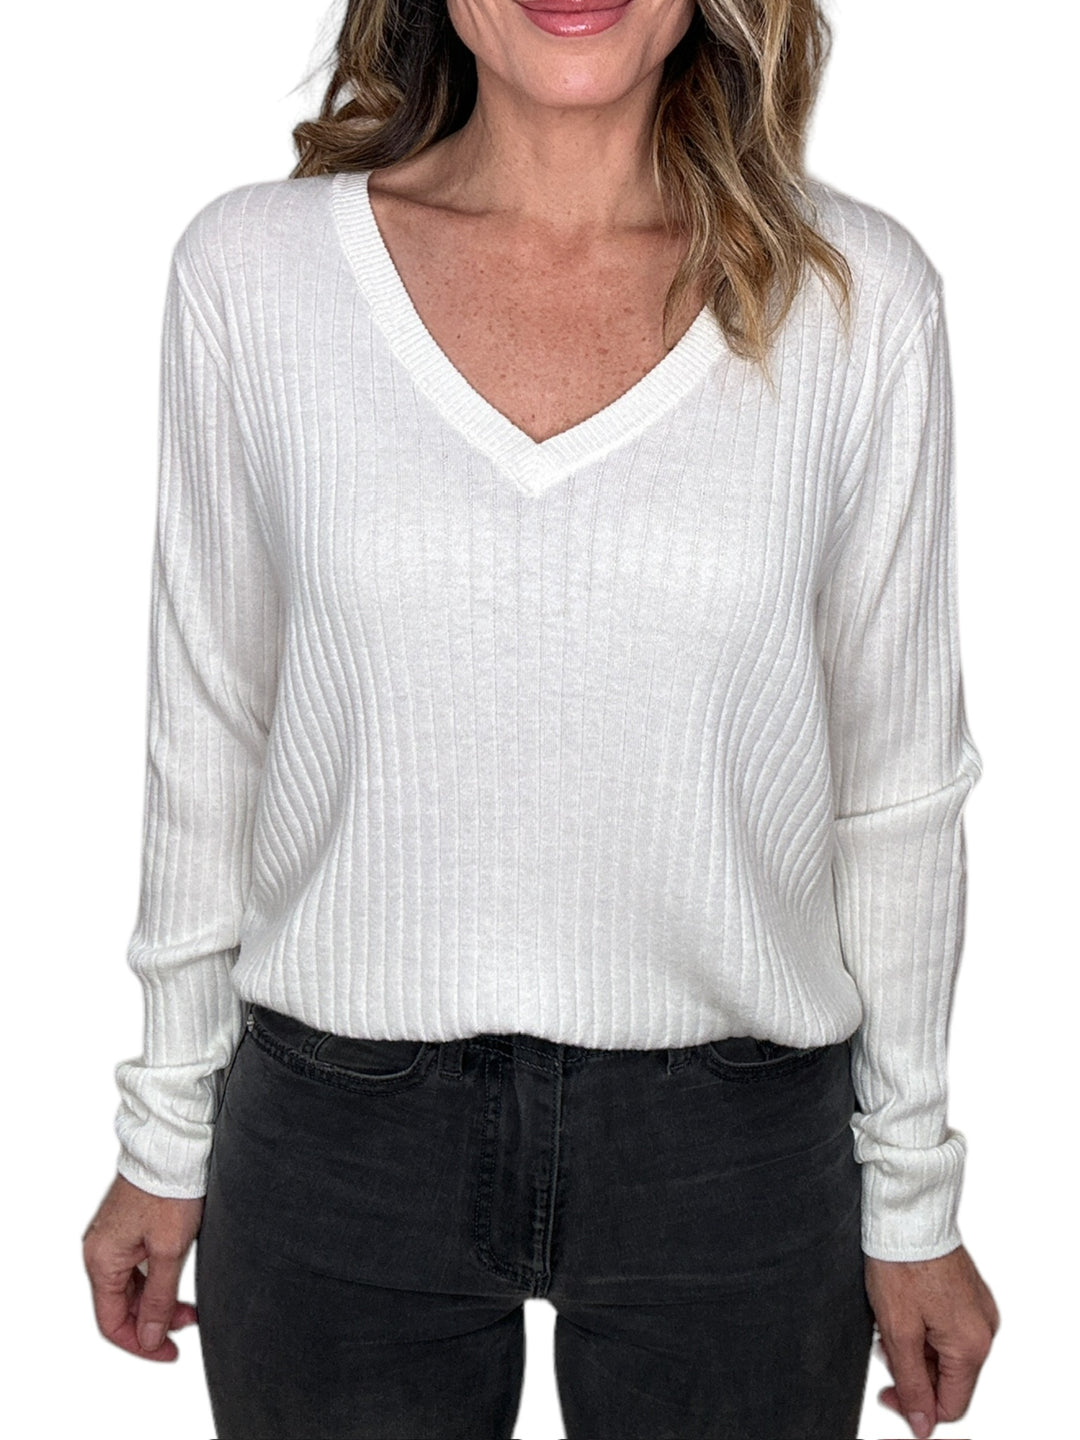 CSC ROX RIBBED SLIM V-WHITE - Kingfisher Road - Online Boutique